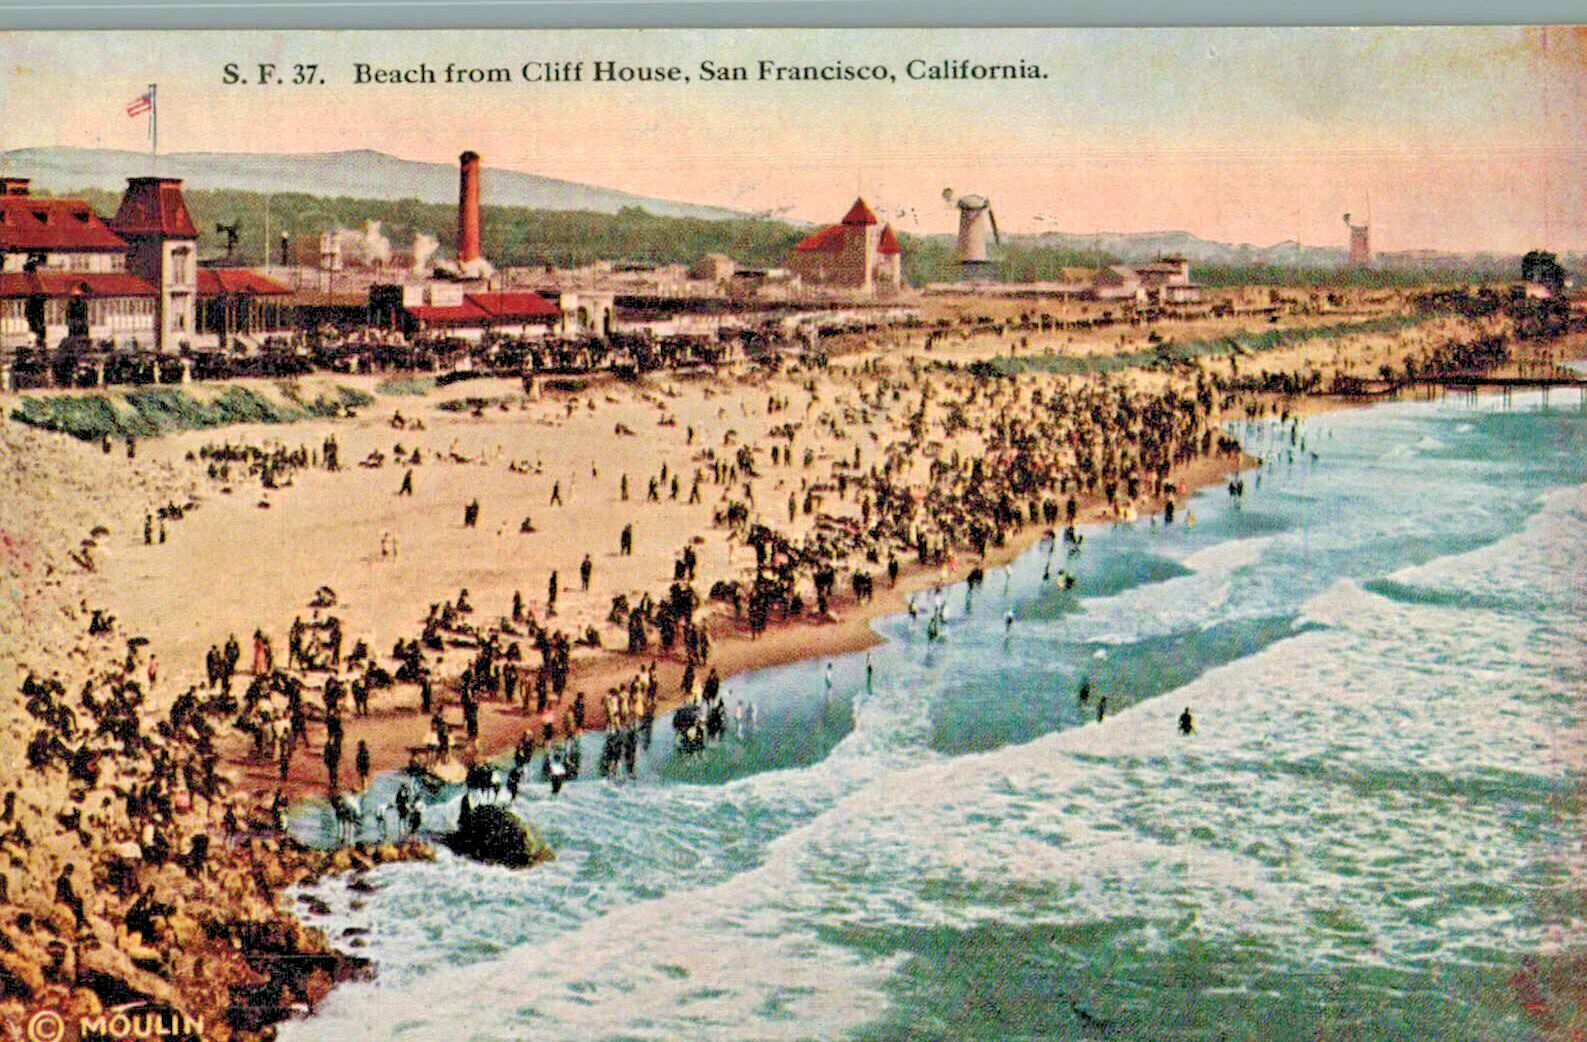 VIntage Postcard-S.F.37, Beach from Cliff House, San Francisco, CA